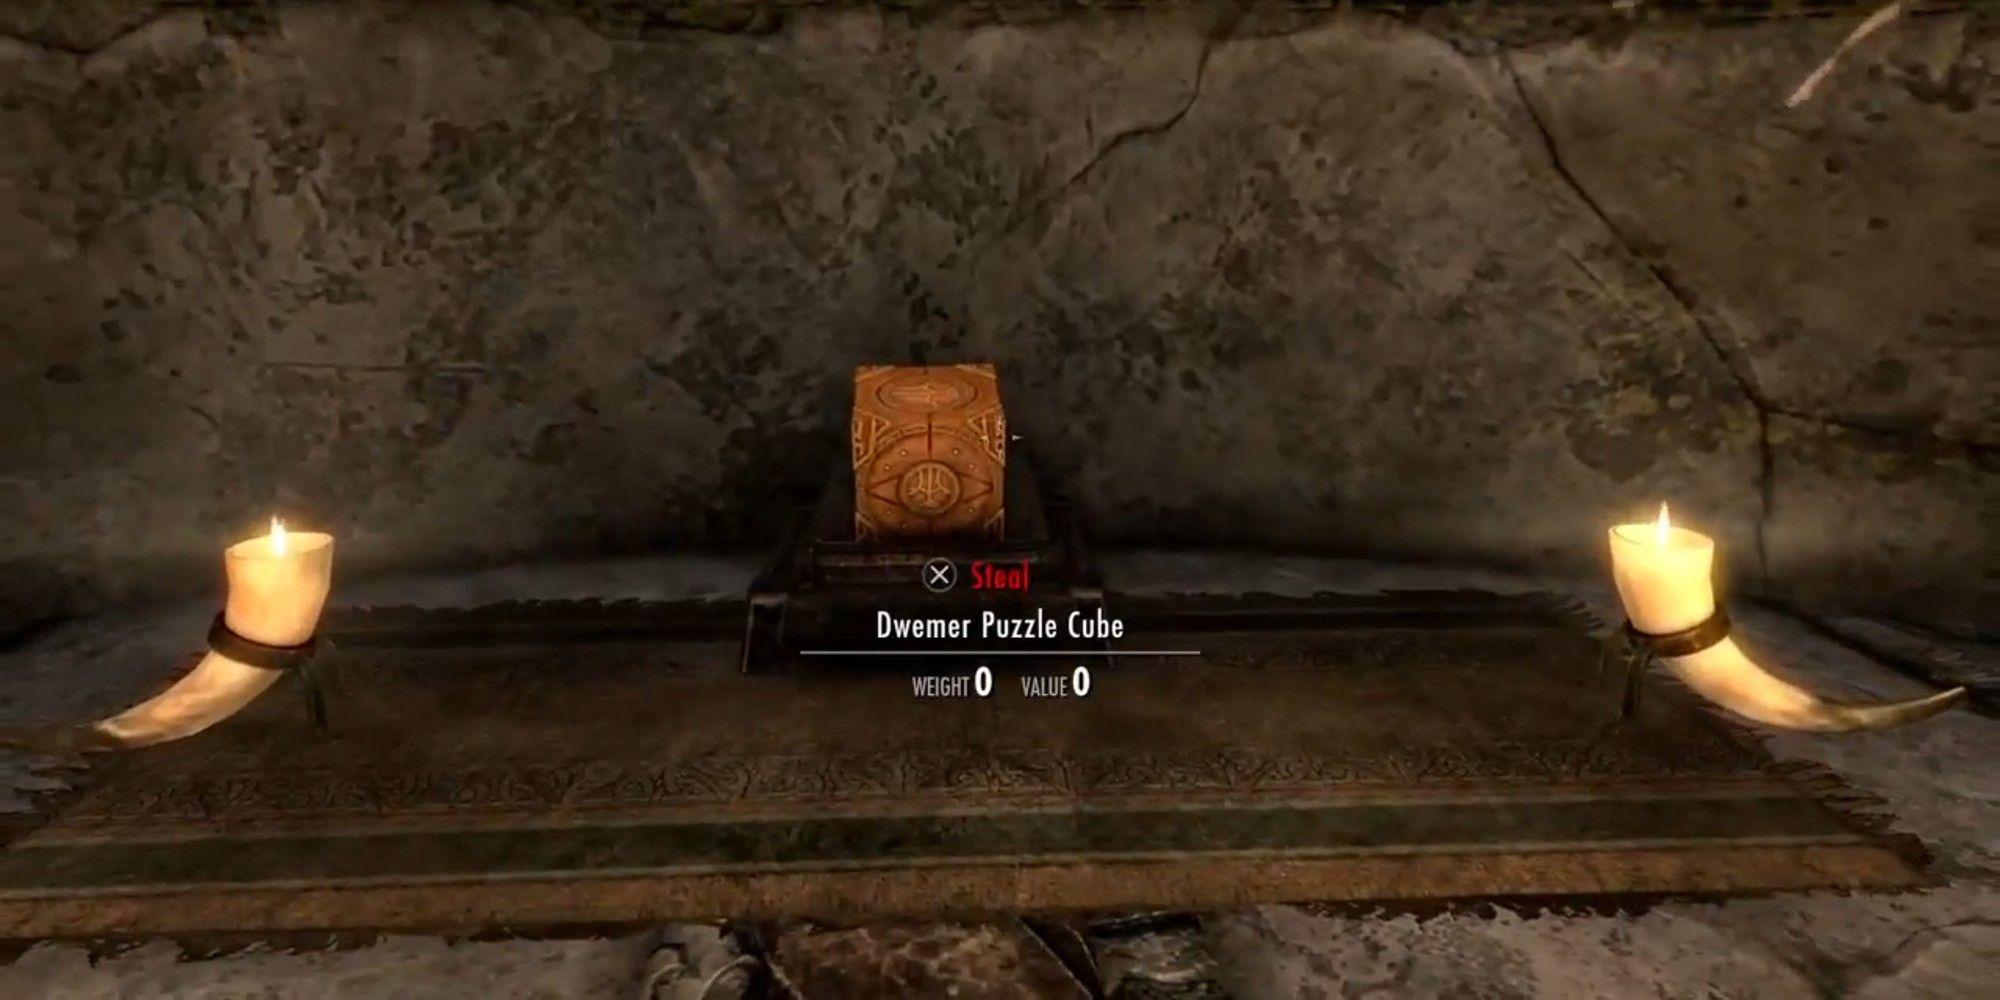 dwemer puzzle cube on table to steal